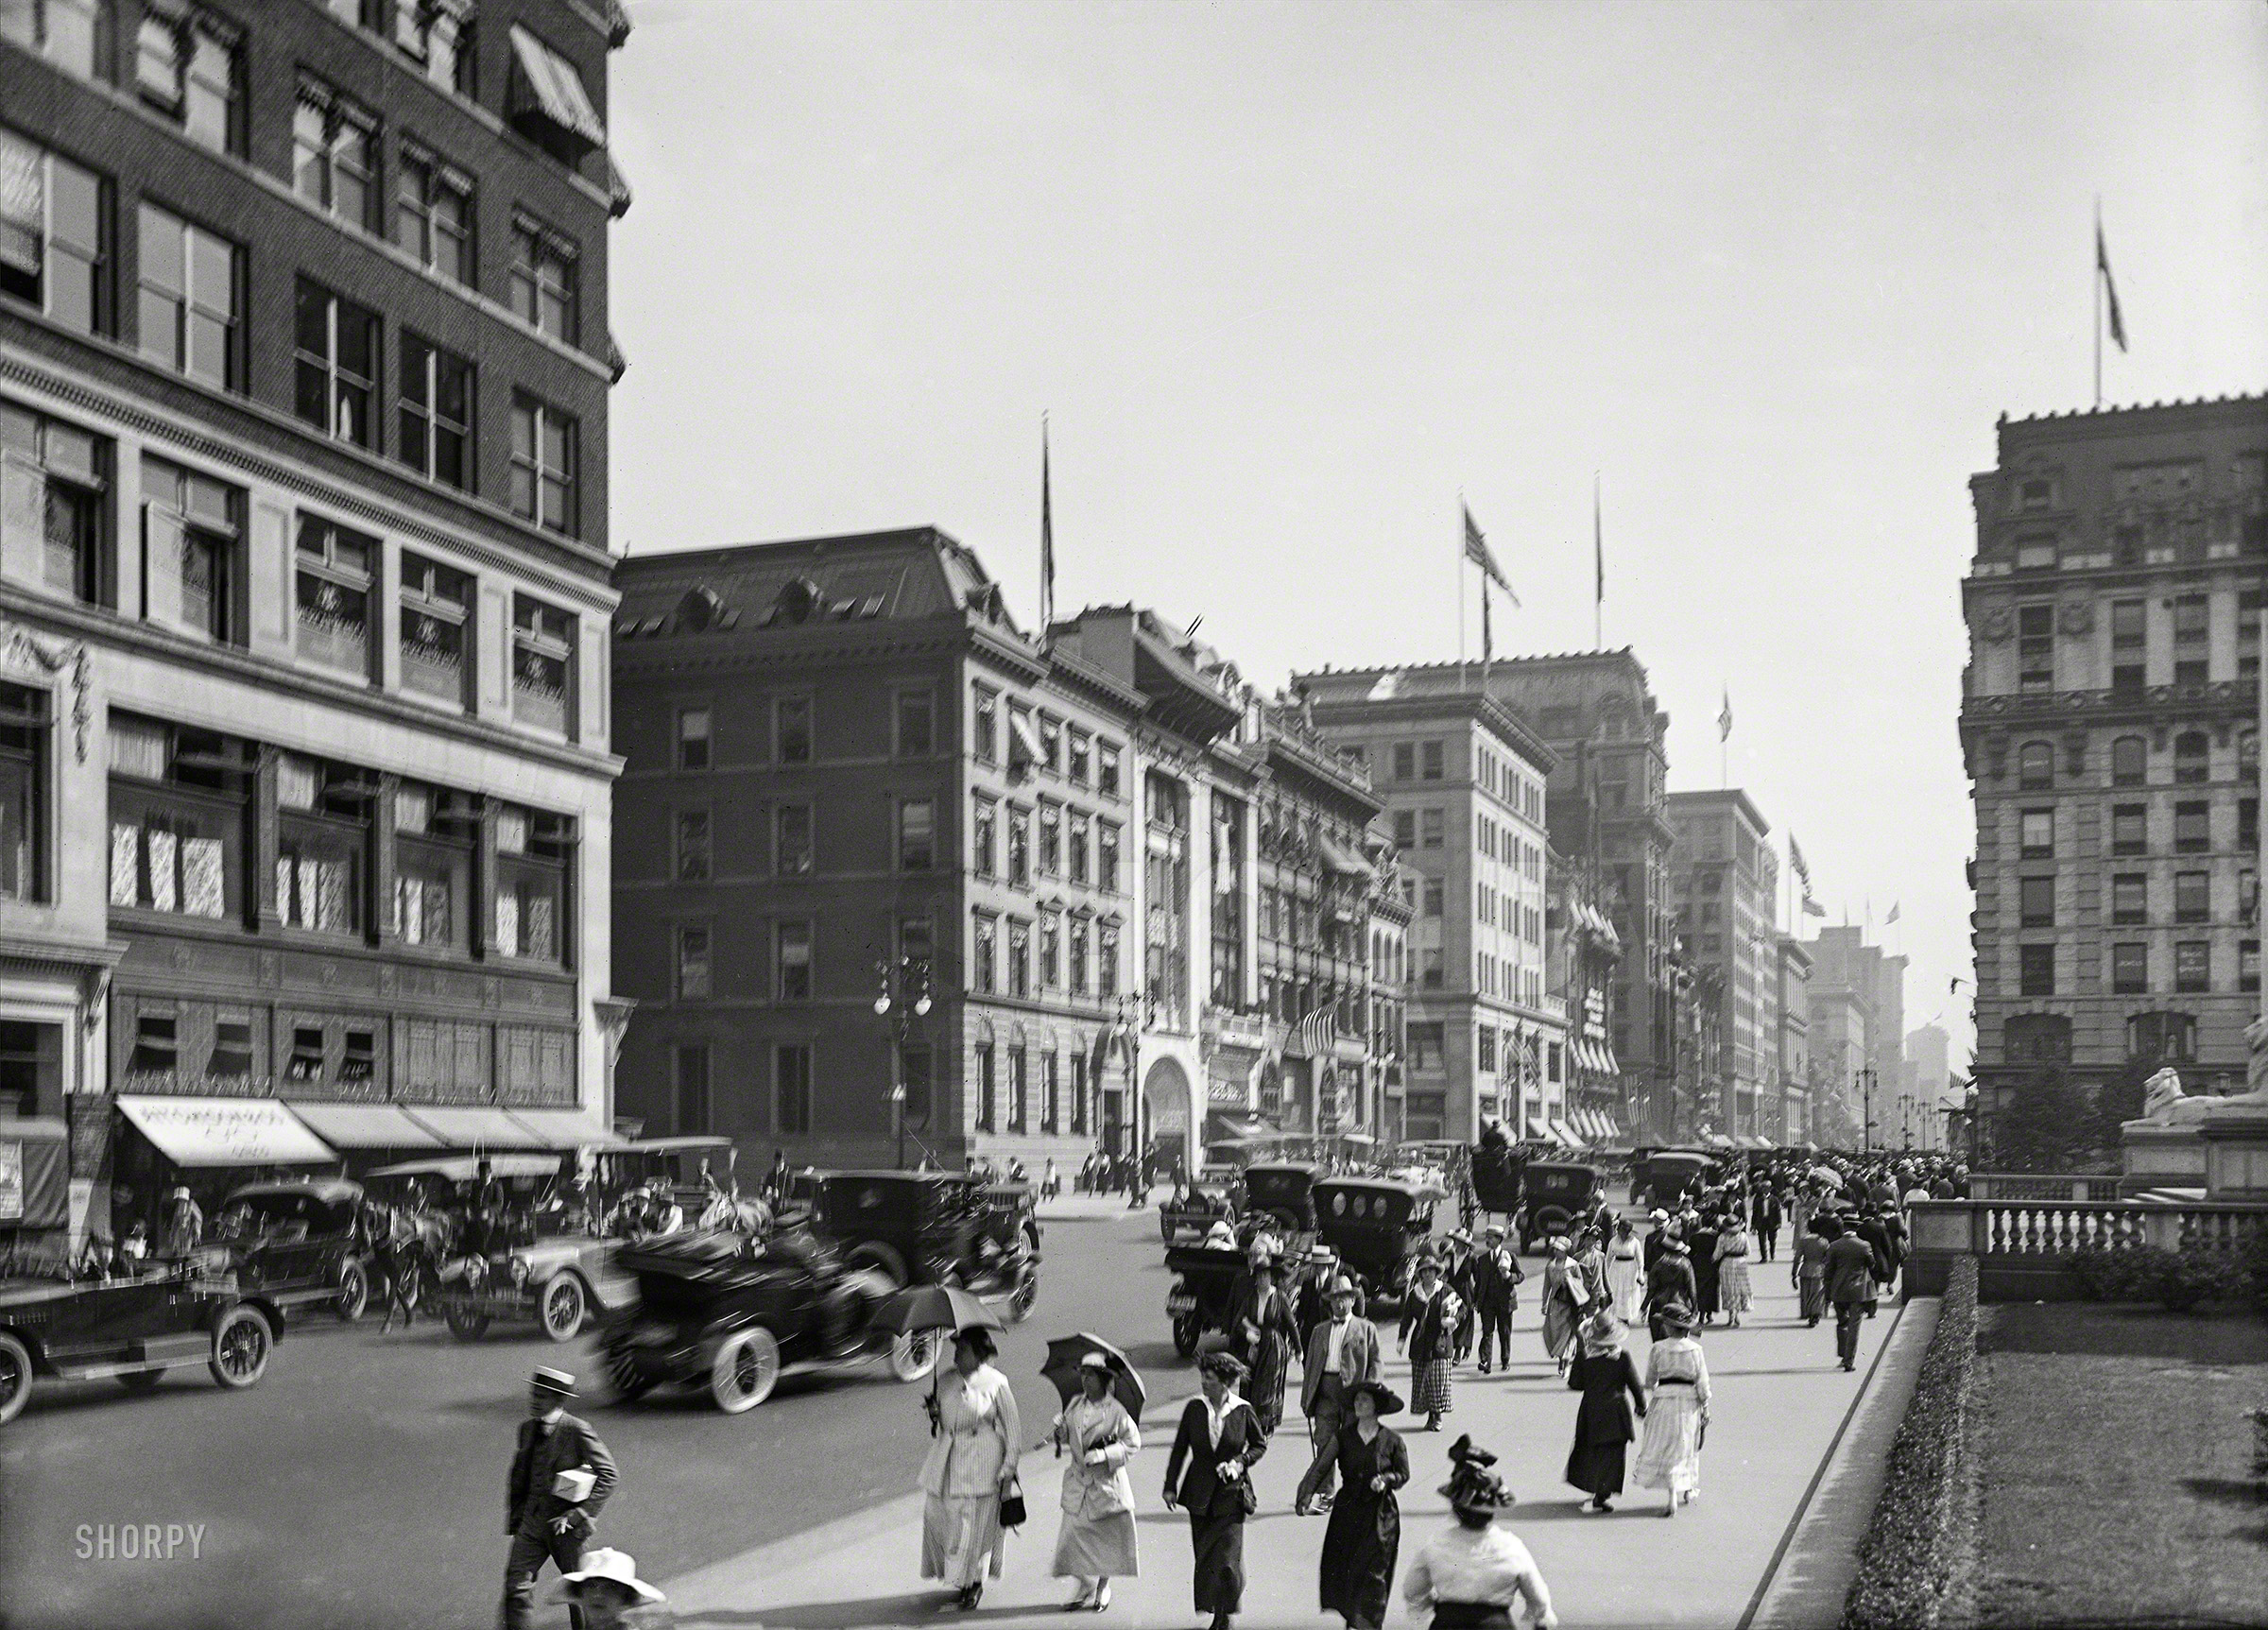 New York circa 1914. "Fifth Avenue at 42nd Street." Lions of the New York Public Library at right. 5x7 inch dry plate glass negative. View full size.